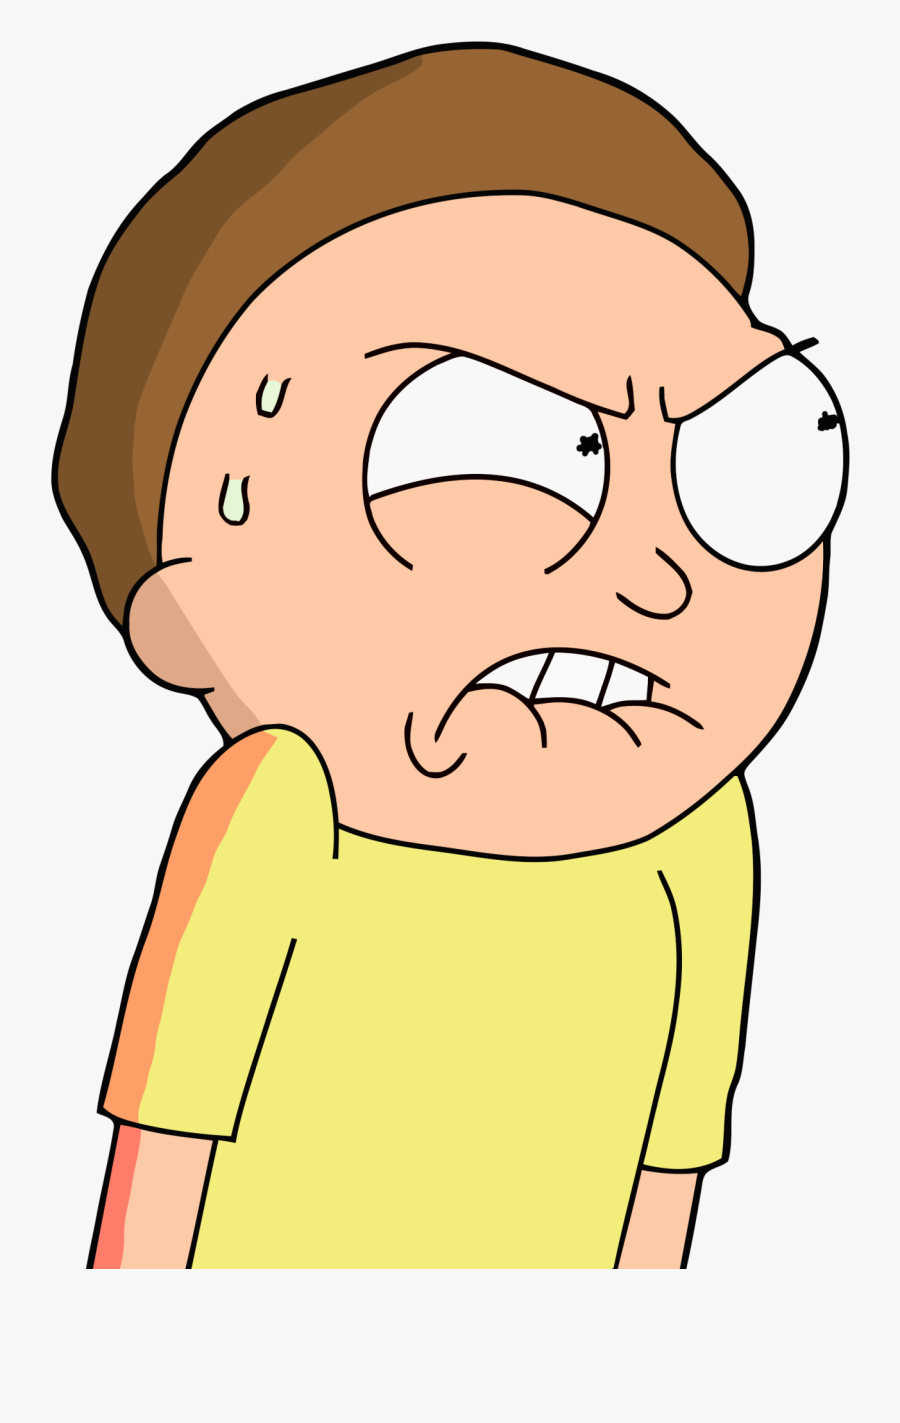 Jpg Free Rick And Morty Angry - Rick And Morty Angry, Transparent Clipart